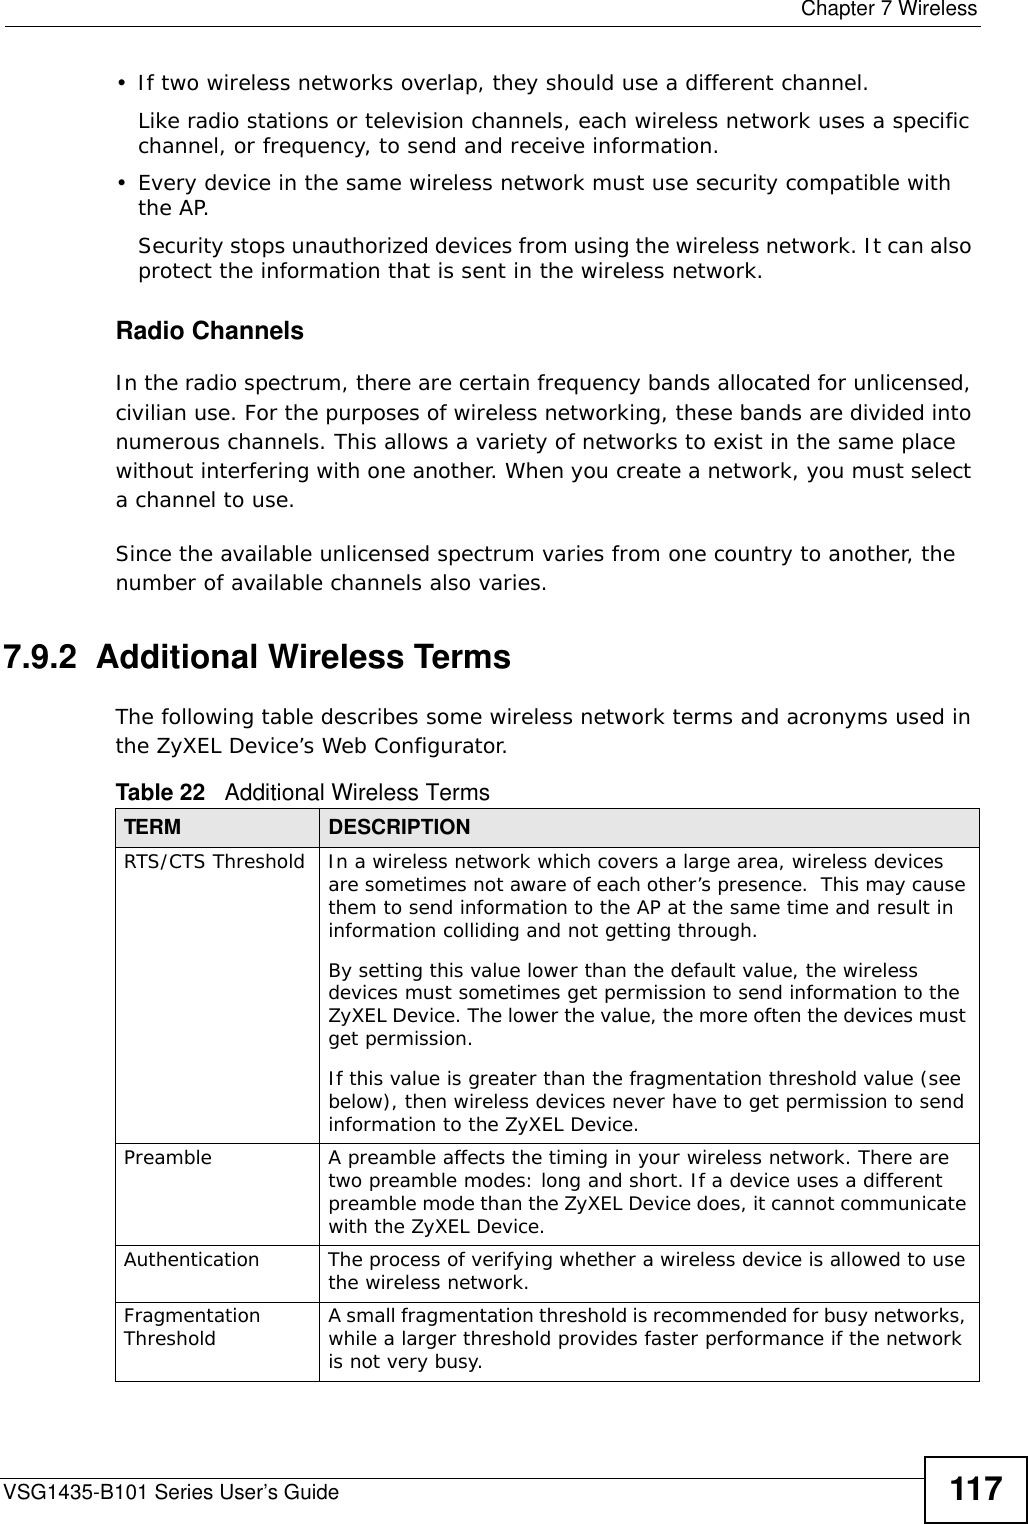  Chapter 7 WirelessVSG1435-B101 Series User’s Guide 117• If two wireless networks overlap, they should use a different channel.Like radio stations or television channels, each wireless network uses a specific channel, or frequency, to send and receive information.• Every device in the same wireless network must use security compatible with the AP.Security stops unauthorized devices from using the wireless network. It can also protect the information that is sent in the wireless network.Radio ChannelsIn the radio spectrum, there are certain frequency bands allocated for unlicensed, civilian use. For the purposes of wireless networking, these bands are divided into numerous channels. This allows a variety of networks to exist in the same place without interfering with one another. When you create a network, you must select a channel to use. Since the available unlicensed spectrum varies from one country to another, the number of available channels also varies. 7.9.2  Additional Wireless TermsThe following table describes some wireless network terms and acronyms used in the ZyXEL Device’s Web Configurator.Table 22   Additional Wireless TermsTERM DESCRIPTIONRTS/CTS Threshold In a wireless network which covers a large area, wireless devices are sometimes not aware of each other’s presence.  This may cause them to send information to the AP at the same time and result in information colliding and not getting through.By setting this value lower than the default value, the wireless devices must sometimes get permission to send information to the ZyXEL Device. The lower the value, the more often the devices must get permission.If this value is greater than the fragmentation threshold value (see below), then wireless devices never have to get permission to send information to the ZyXEL Device.Preamble A preamble affects the timing in your wireless network. There are two preamble modes: long and short. If a device uses a different preamble mode than the ZyXEL Device does, it cannot communicate with the ZyXEL Device.Authentication The process of verifying whether a wireless device is allowed to use the wireless network.Fragmentation Threshold A small fragmentation threshold is recommended for busy networks, while a larger threshold provides faster performance if the network is not very busy.